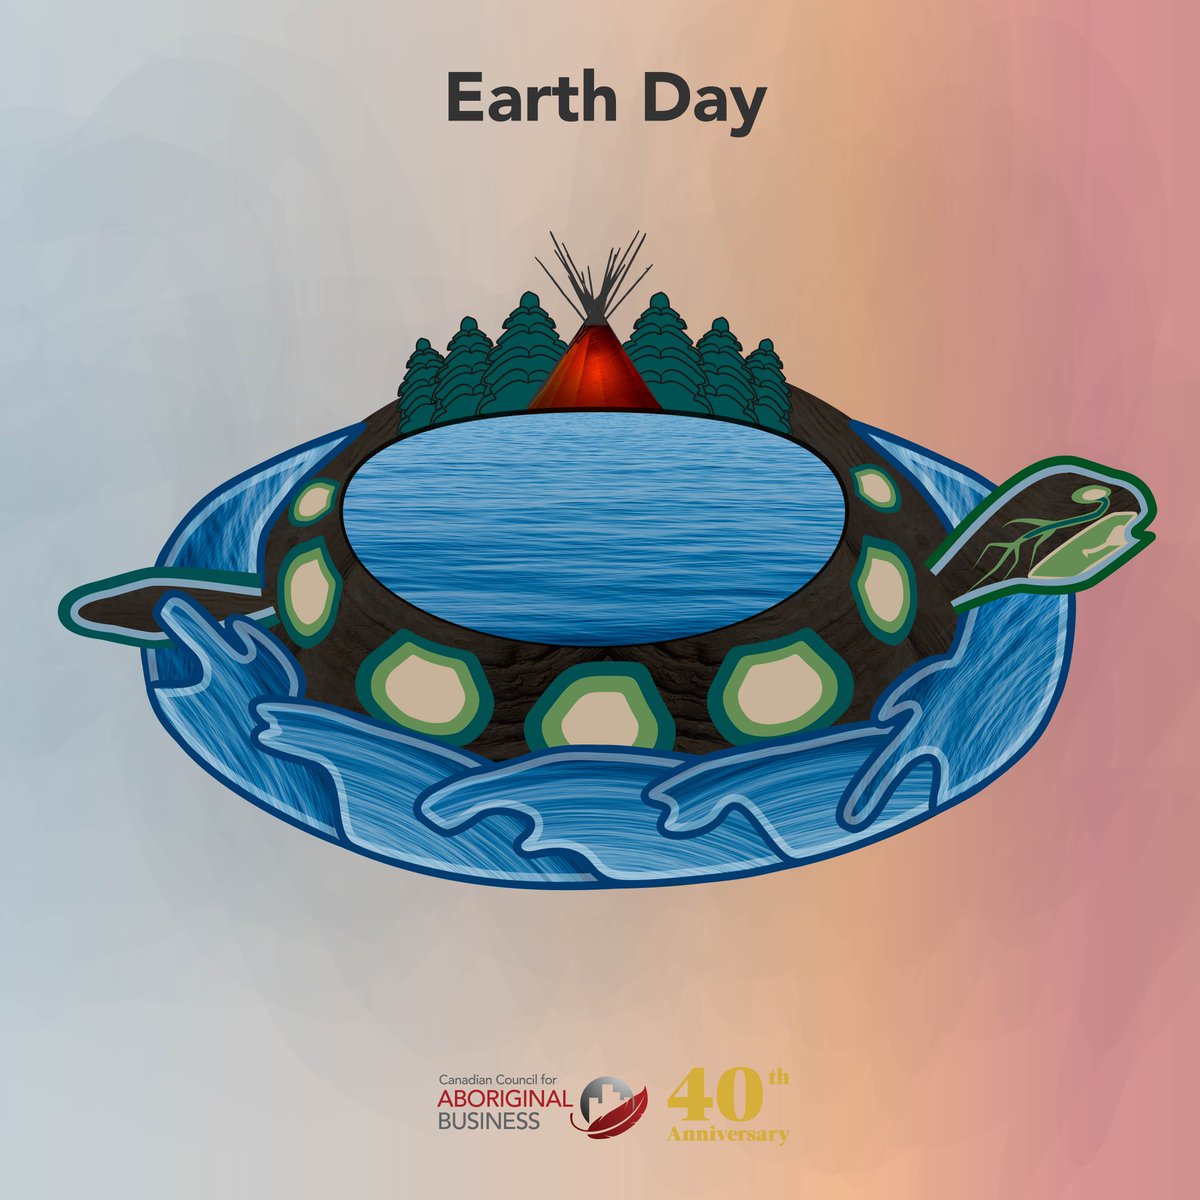 On Earth Day, we reflect on the Indigenous ways of knowing that all living beings and natural elements are connected. When we respect the resources we’ve been given, we work towards a holistic relationship with the Earth, where prosperity and sustainability go hand-in-hand.